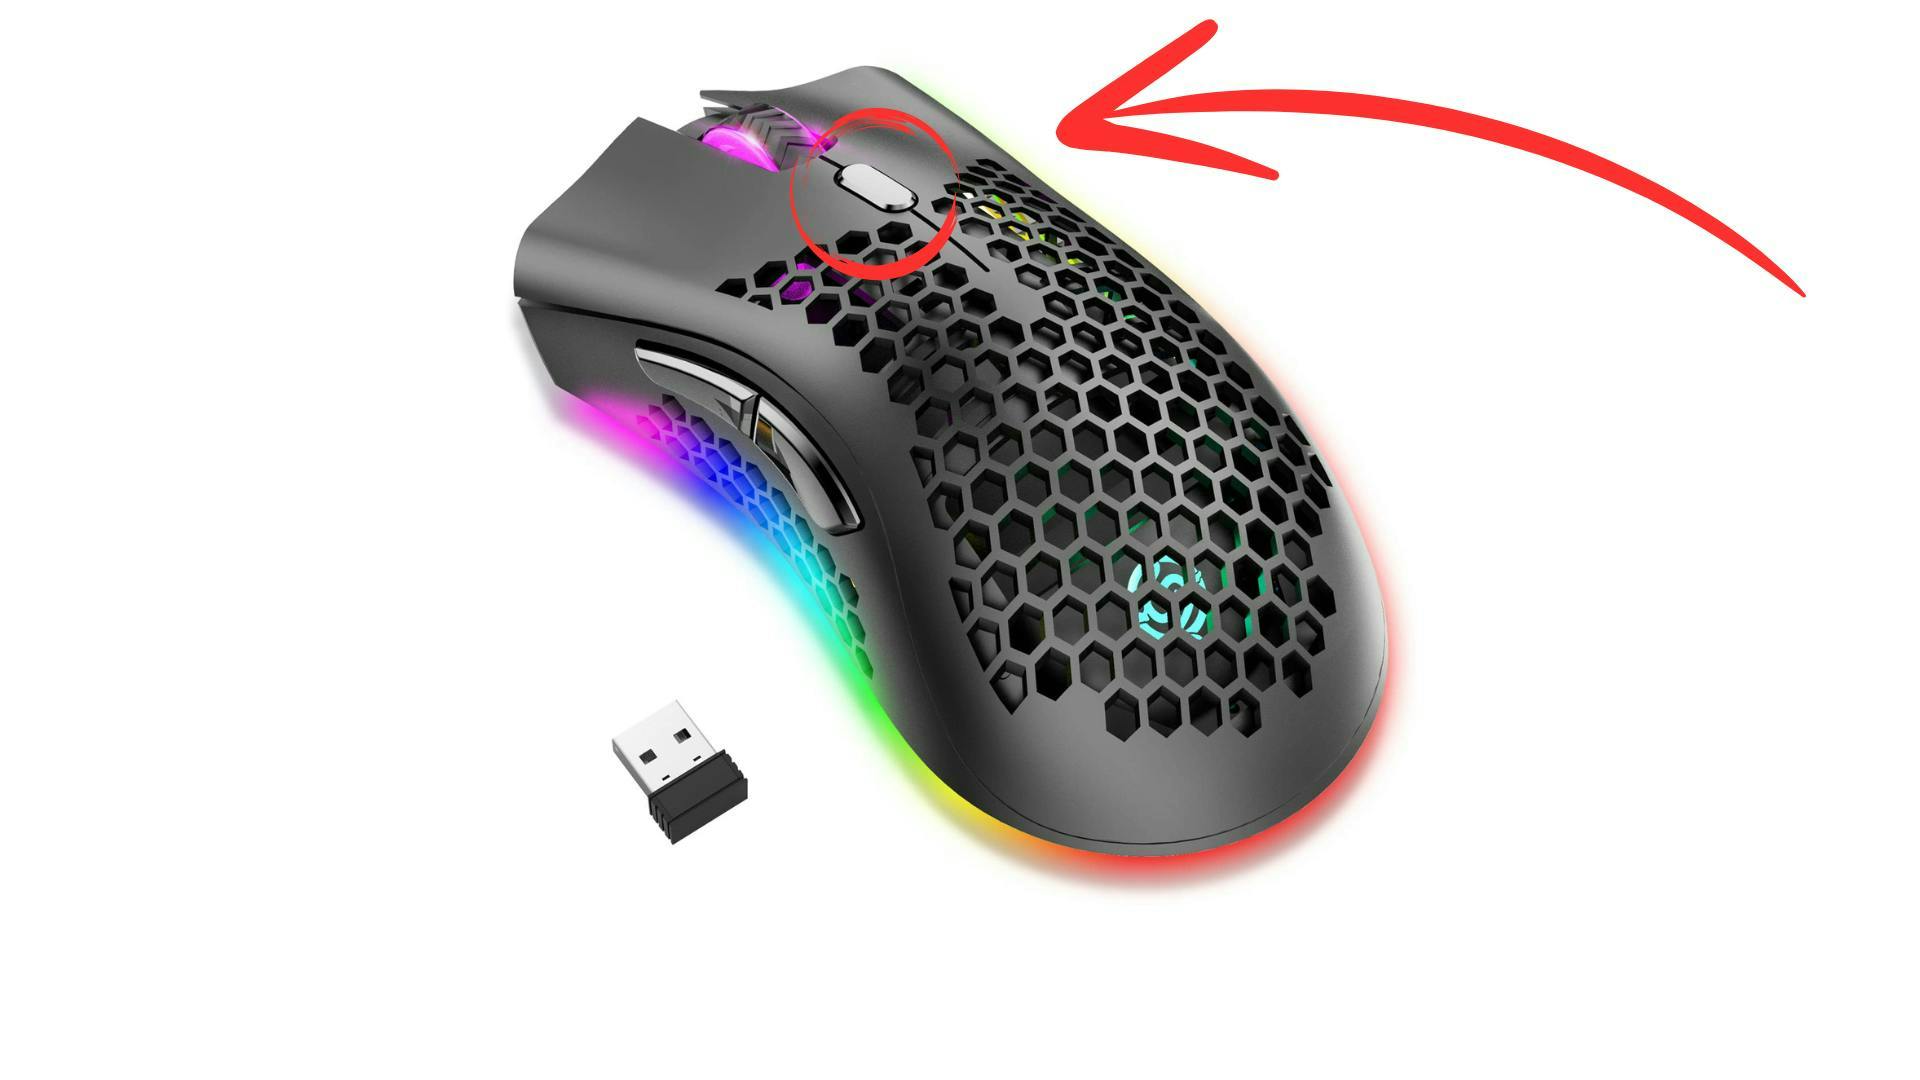 The DPI button (circled in red) is located above or below the scroll wheel on most mice.